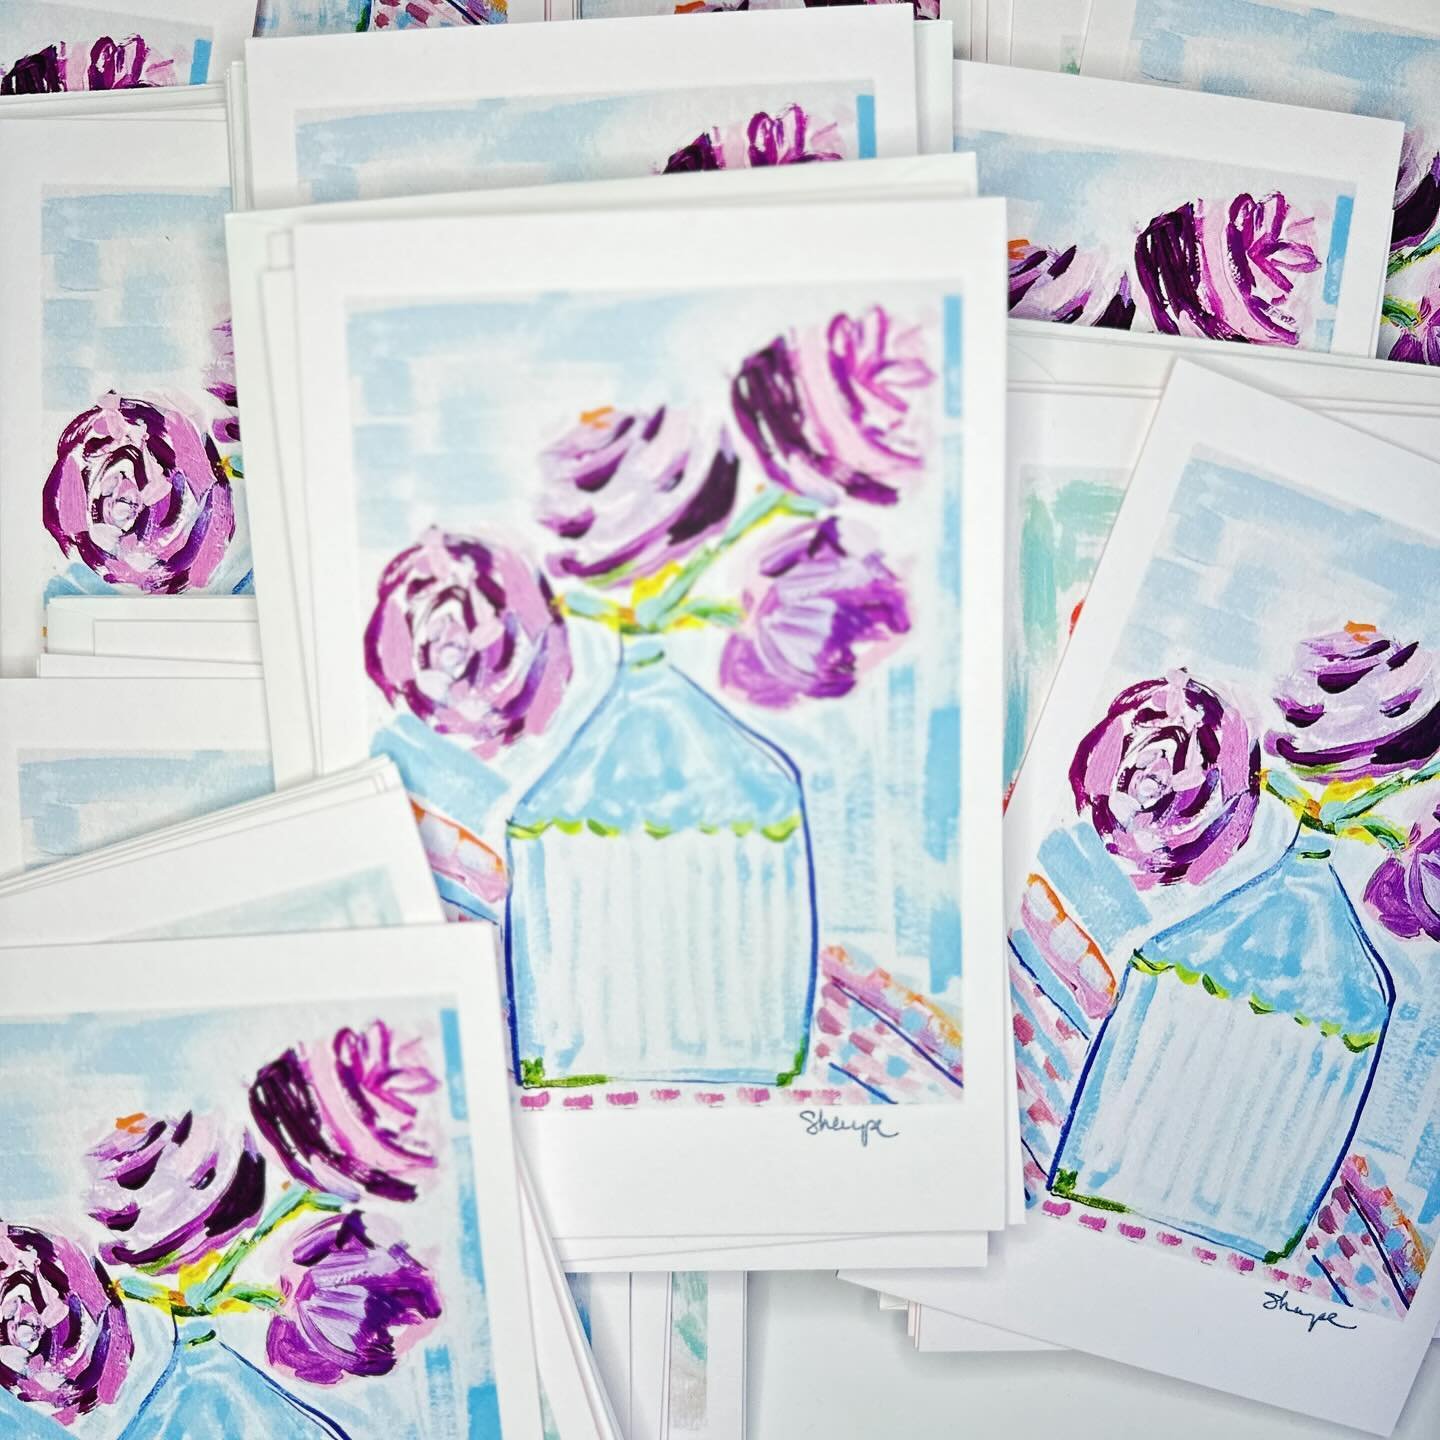 I&rsquo;m obsessed with beautiful stationery, so I created this pretty set of luxe, hand-signed notecards with matching envelopes.  Who wouldn&rsquo;t want a notecard they can frame ?? 

PS- A perfect Mother&rsquo;s Day gift !

I&rsquo;m offering com